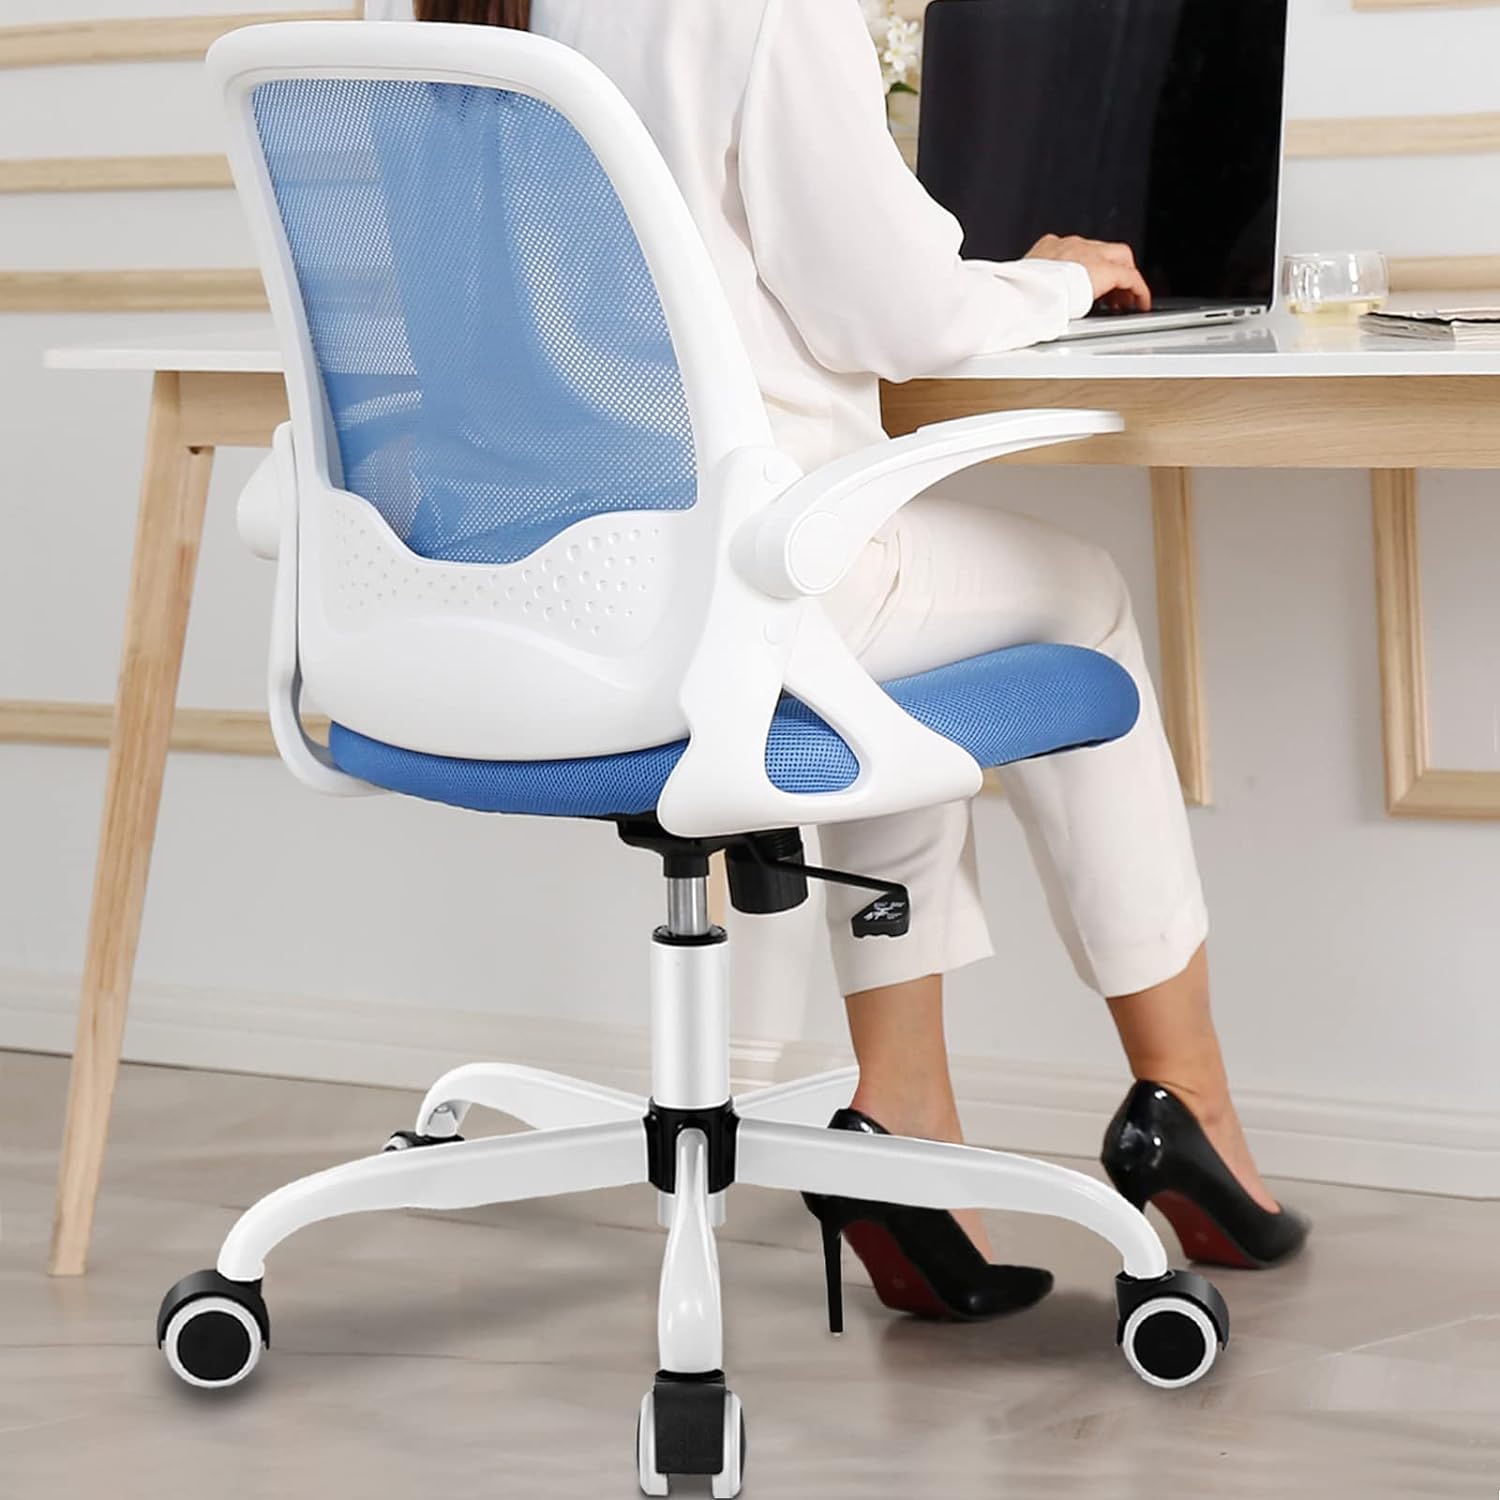 KERDOM Office Chair, Ergonomic Desk Chair, Breathable Mesh Computer Chair, Comfy Swivel Task Chair with Flip-up Armrests and Adjustable Height